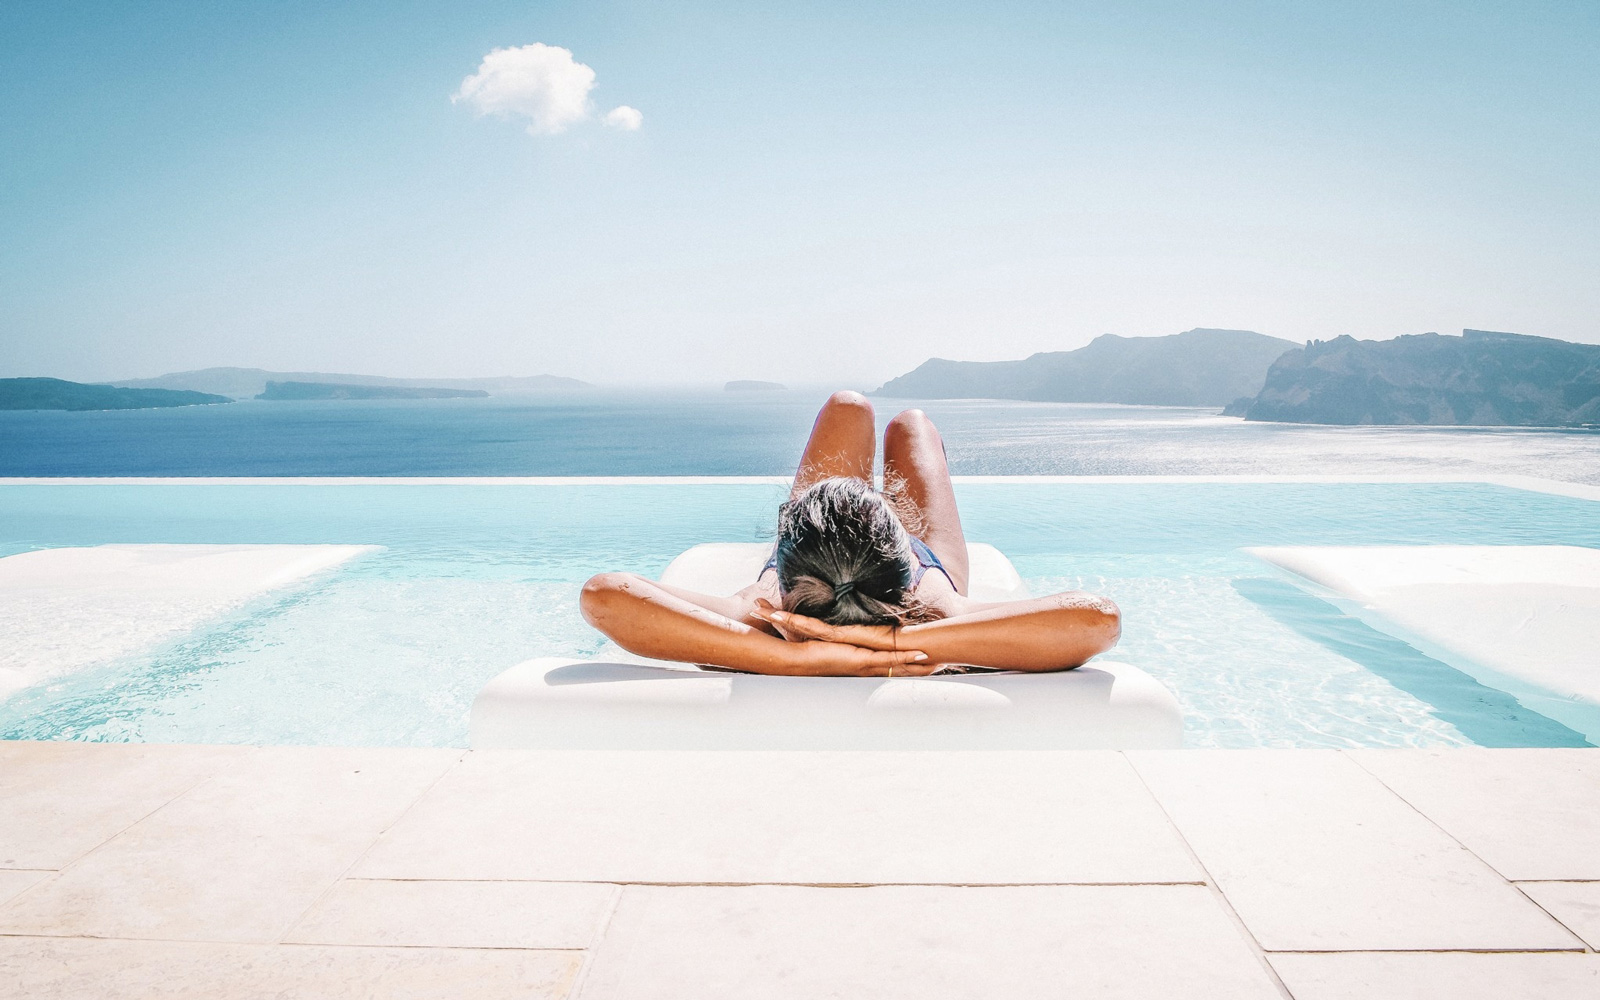 Woman Relaxing On Pool Raft Floating On Swimming Pool Against Sky